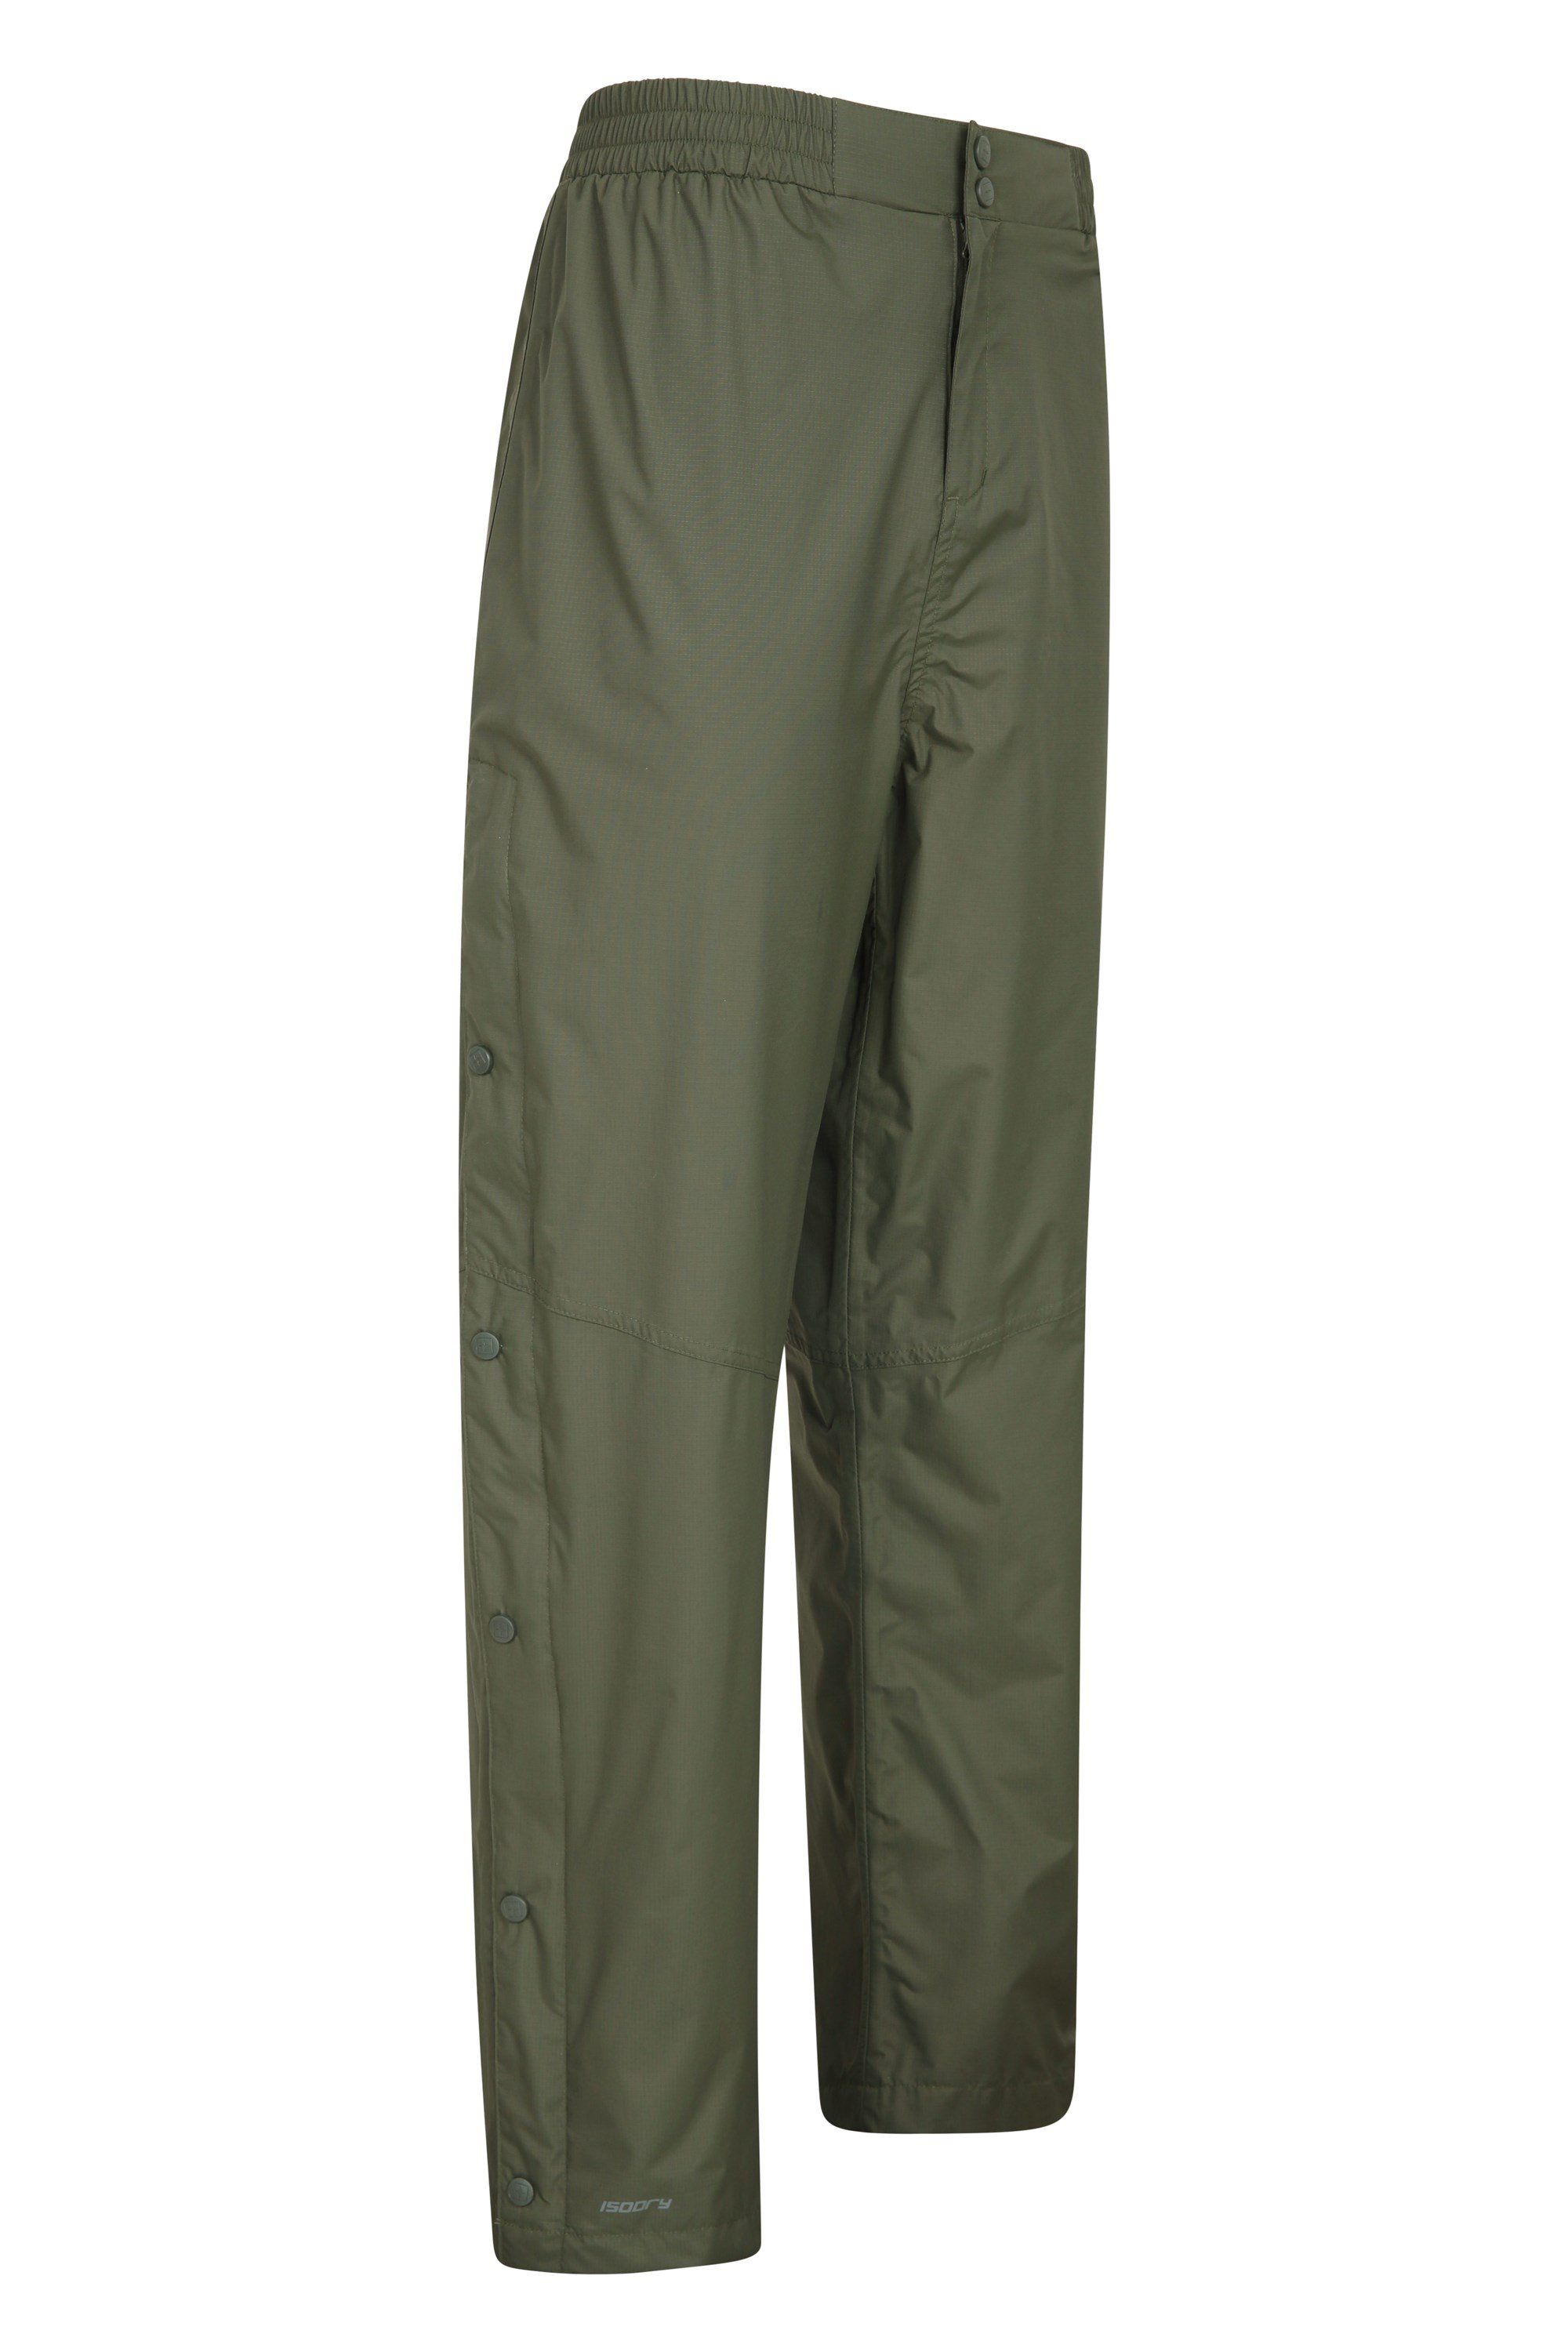 Mountain Warehouse Mens Waterproof Overtrousers with Highly Breathable Membrane 